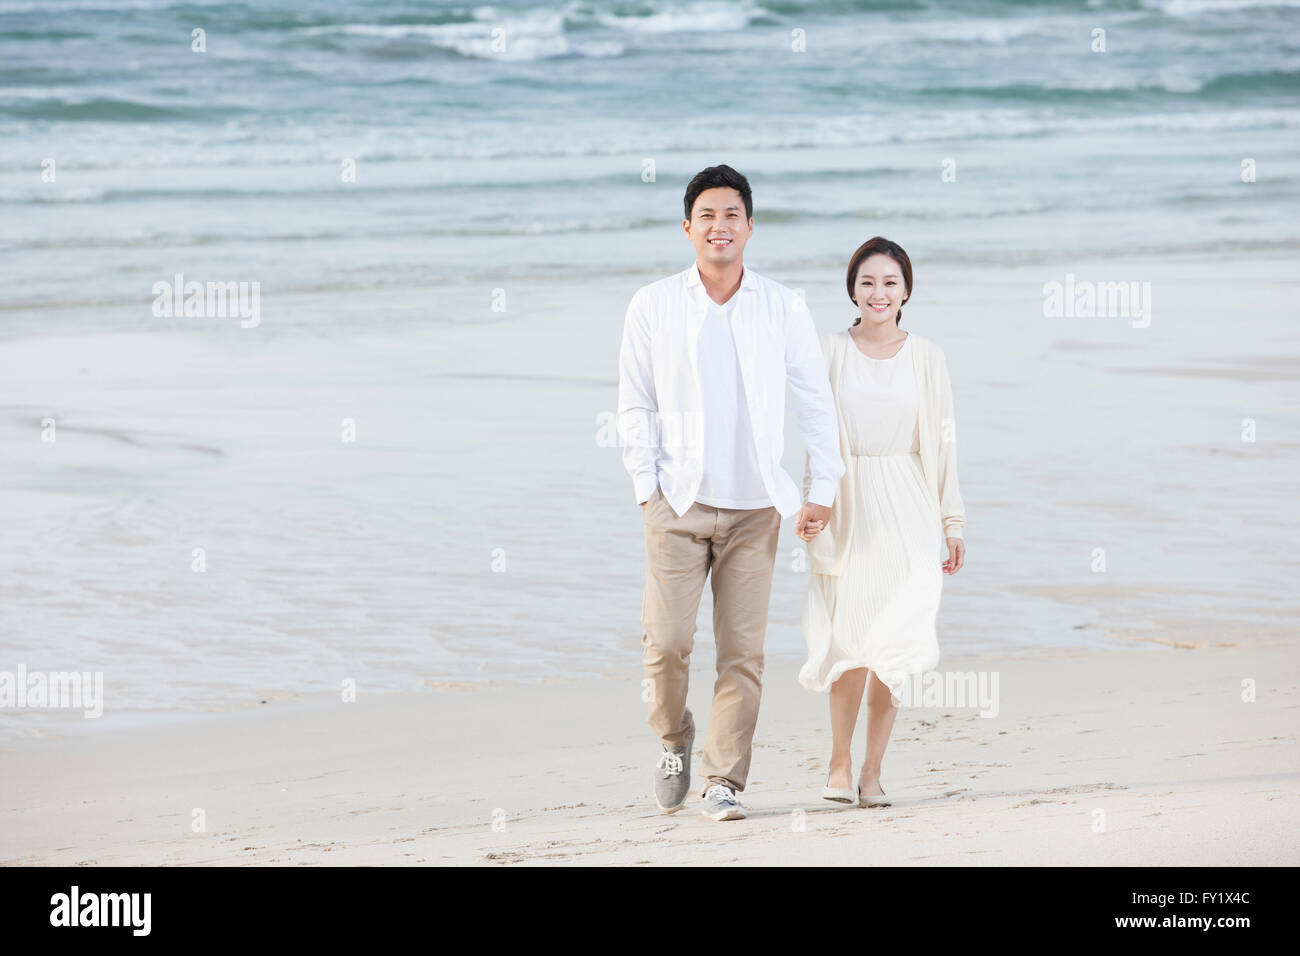 Couple walking hand in hand at the beach Stock Photo